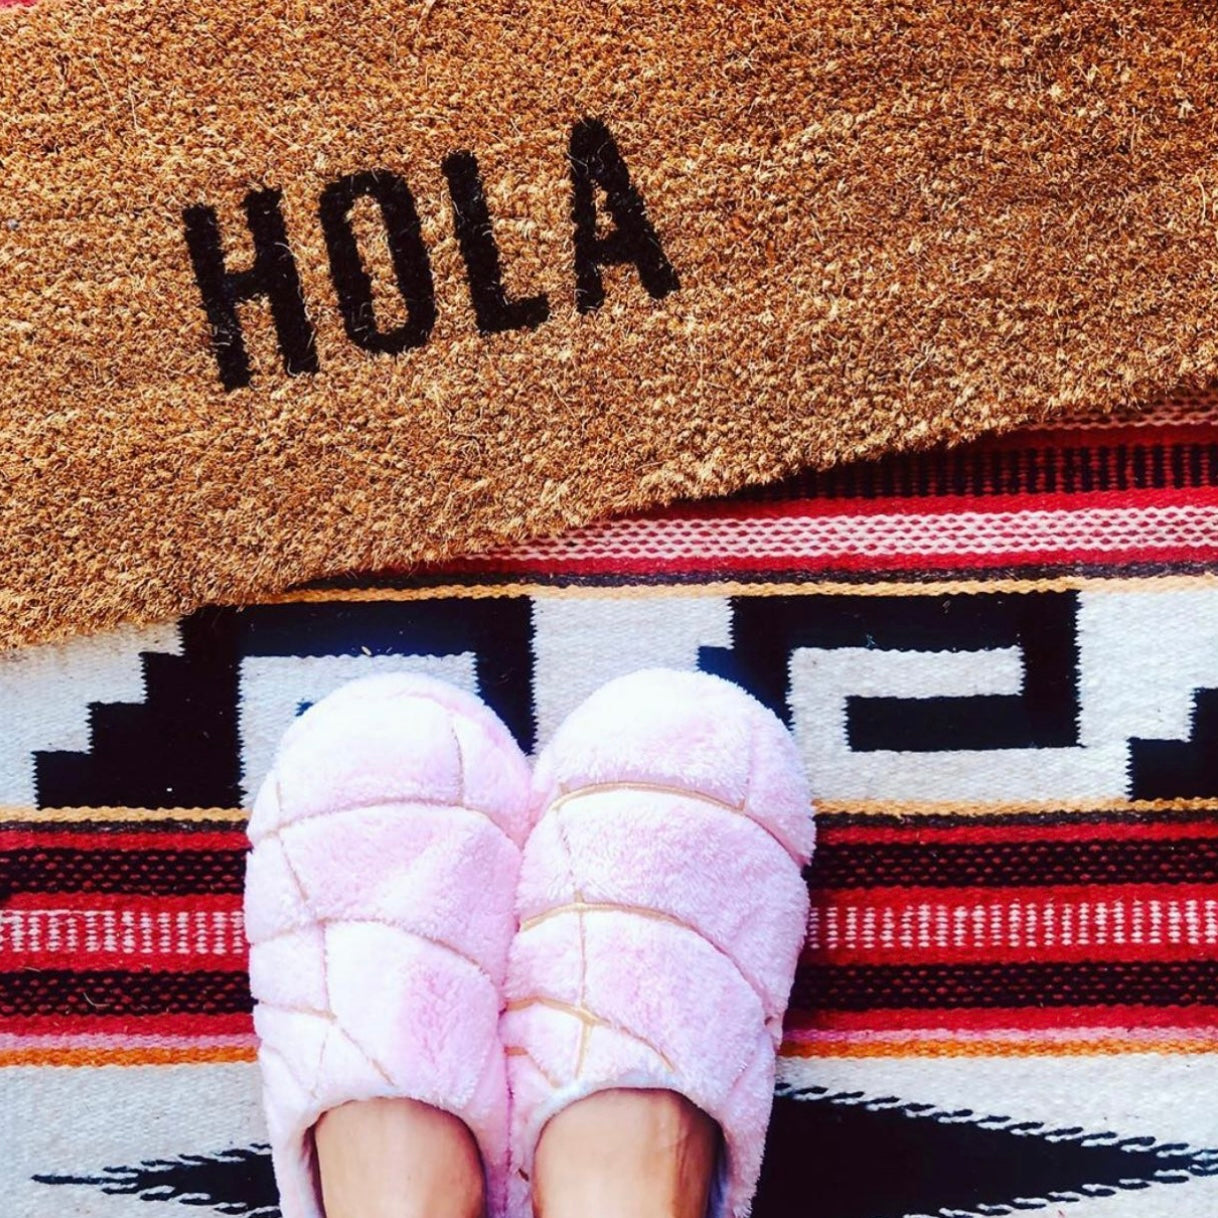 Top view of light pink concha pantuflas (slippers). Photo features HOLA welcome mat.